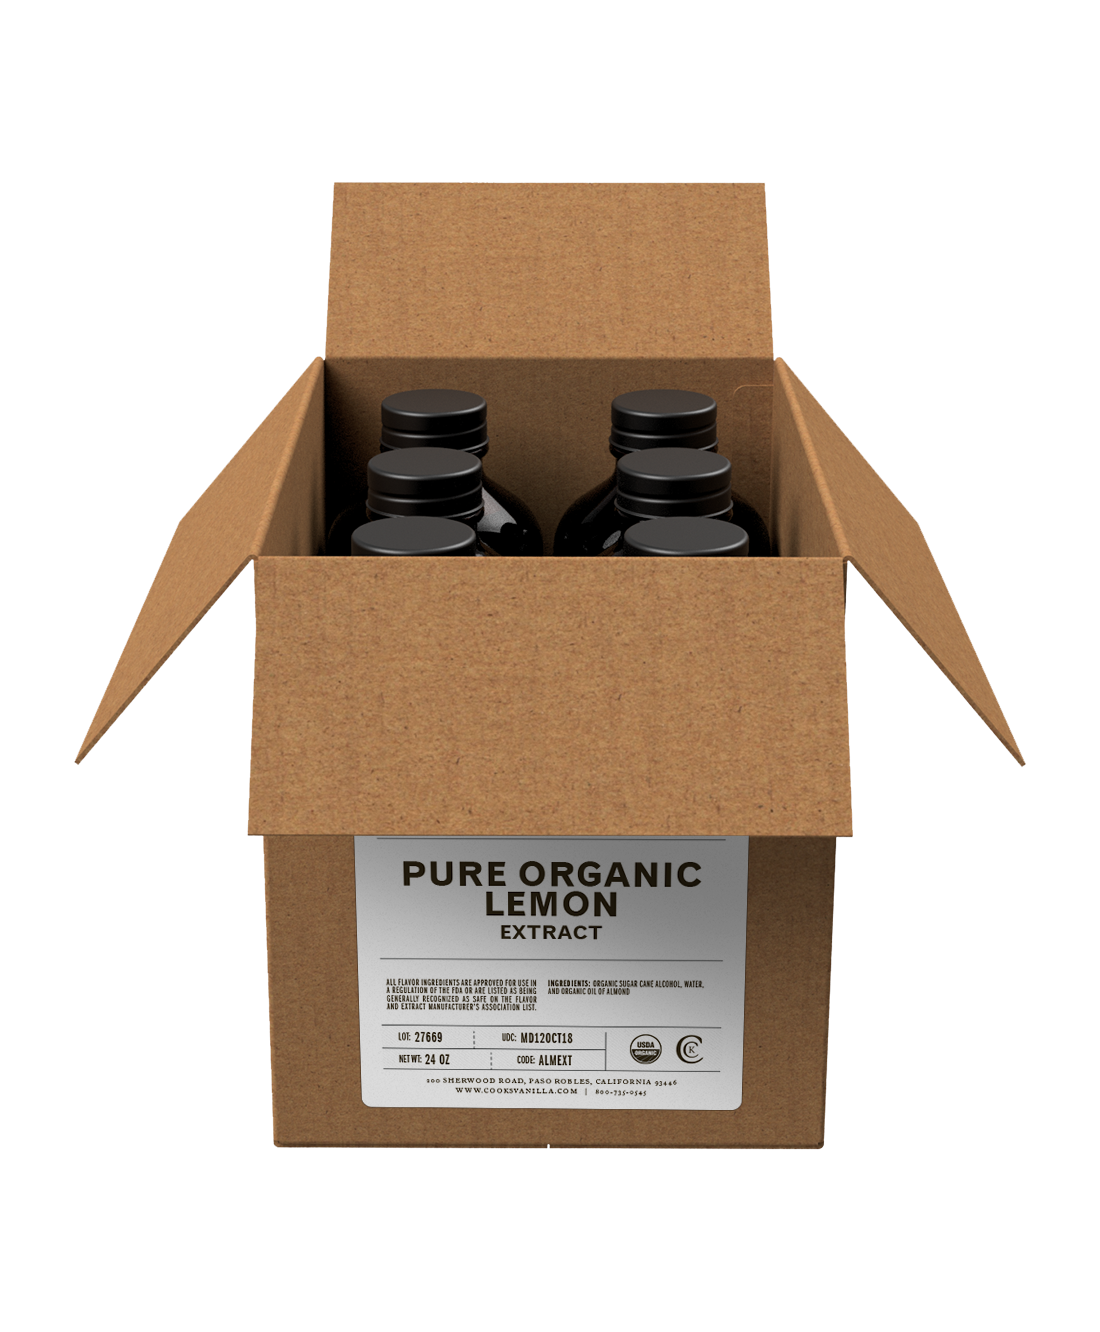 Flavoring | Organic Lemon Extract (Pure) | Packs and Cases